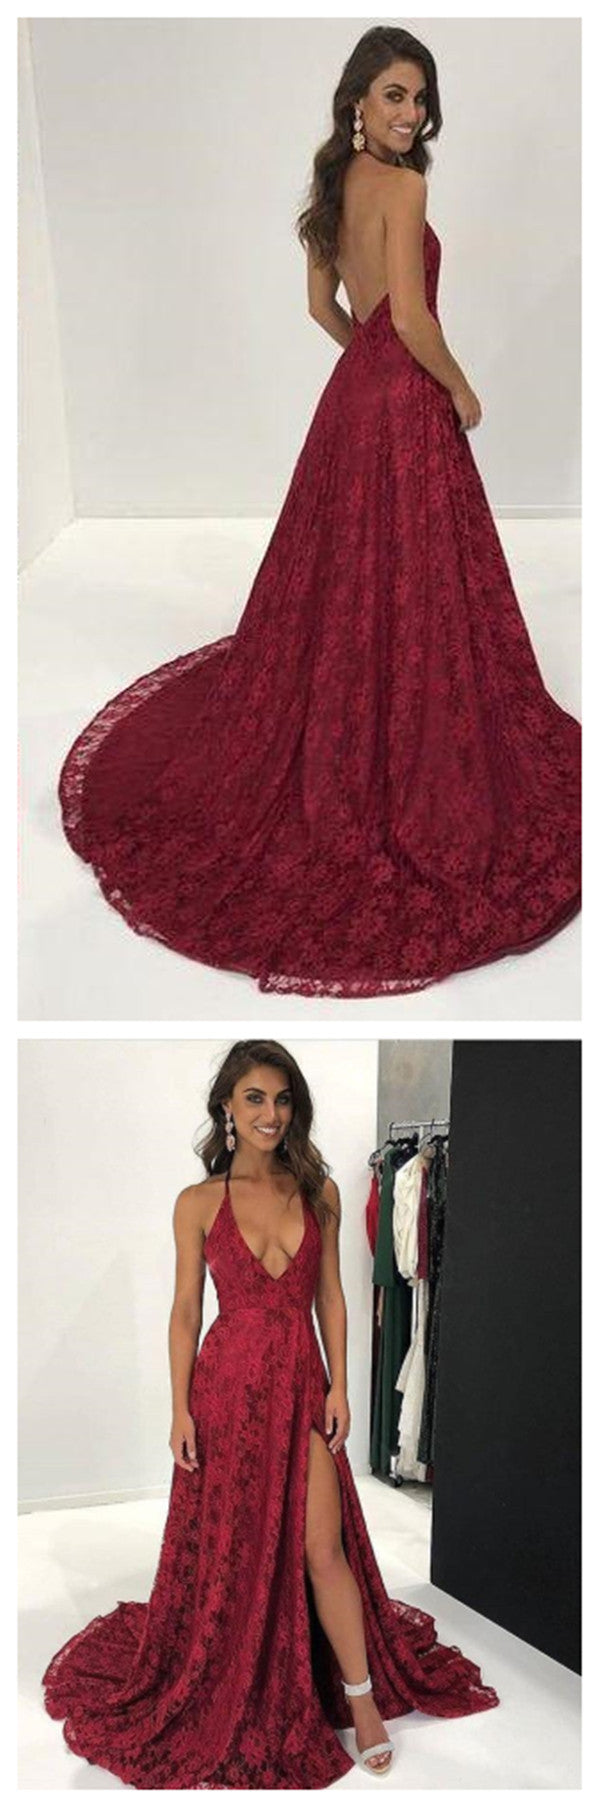 Sexy Deep V-neck Long Prom Dresses, Backless Evening Party Dresses